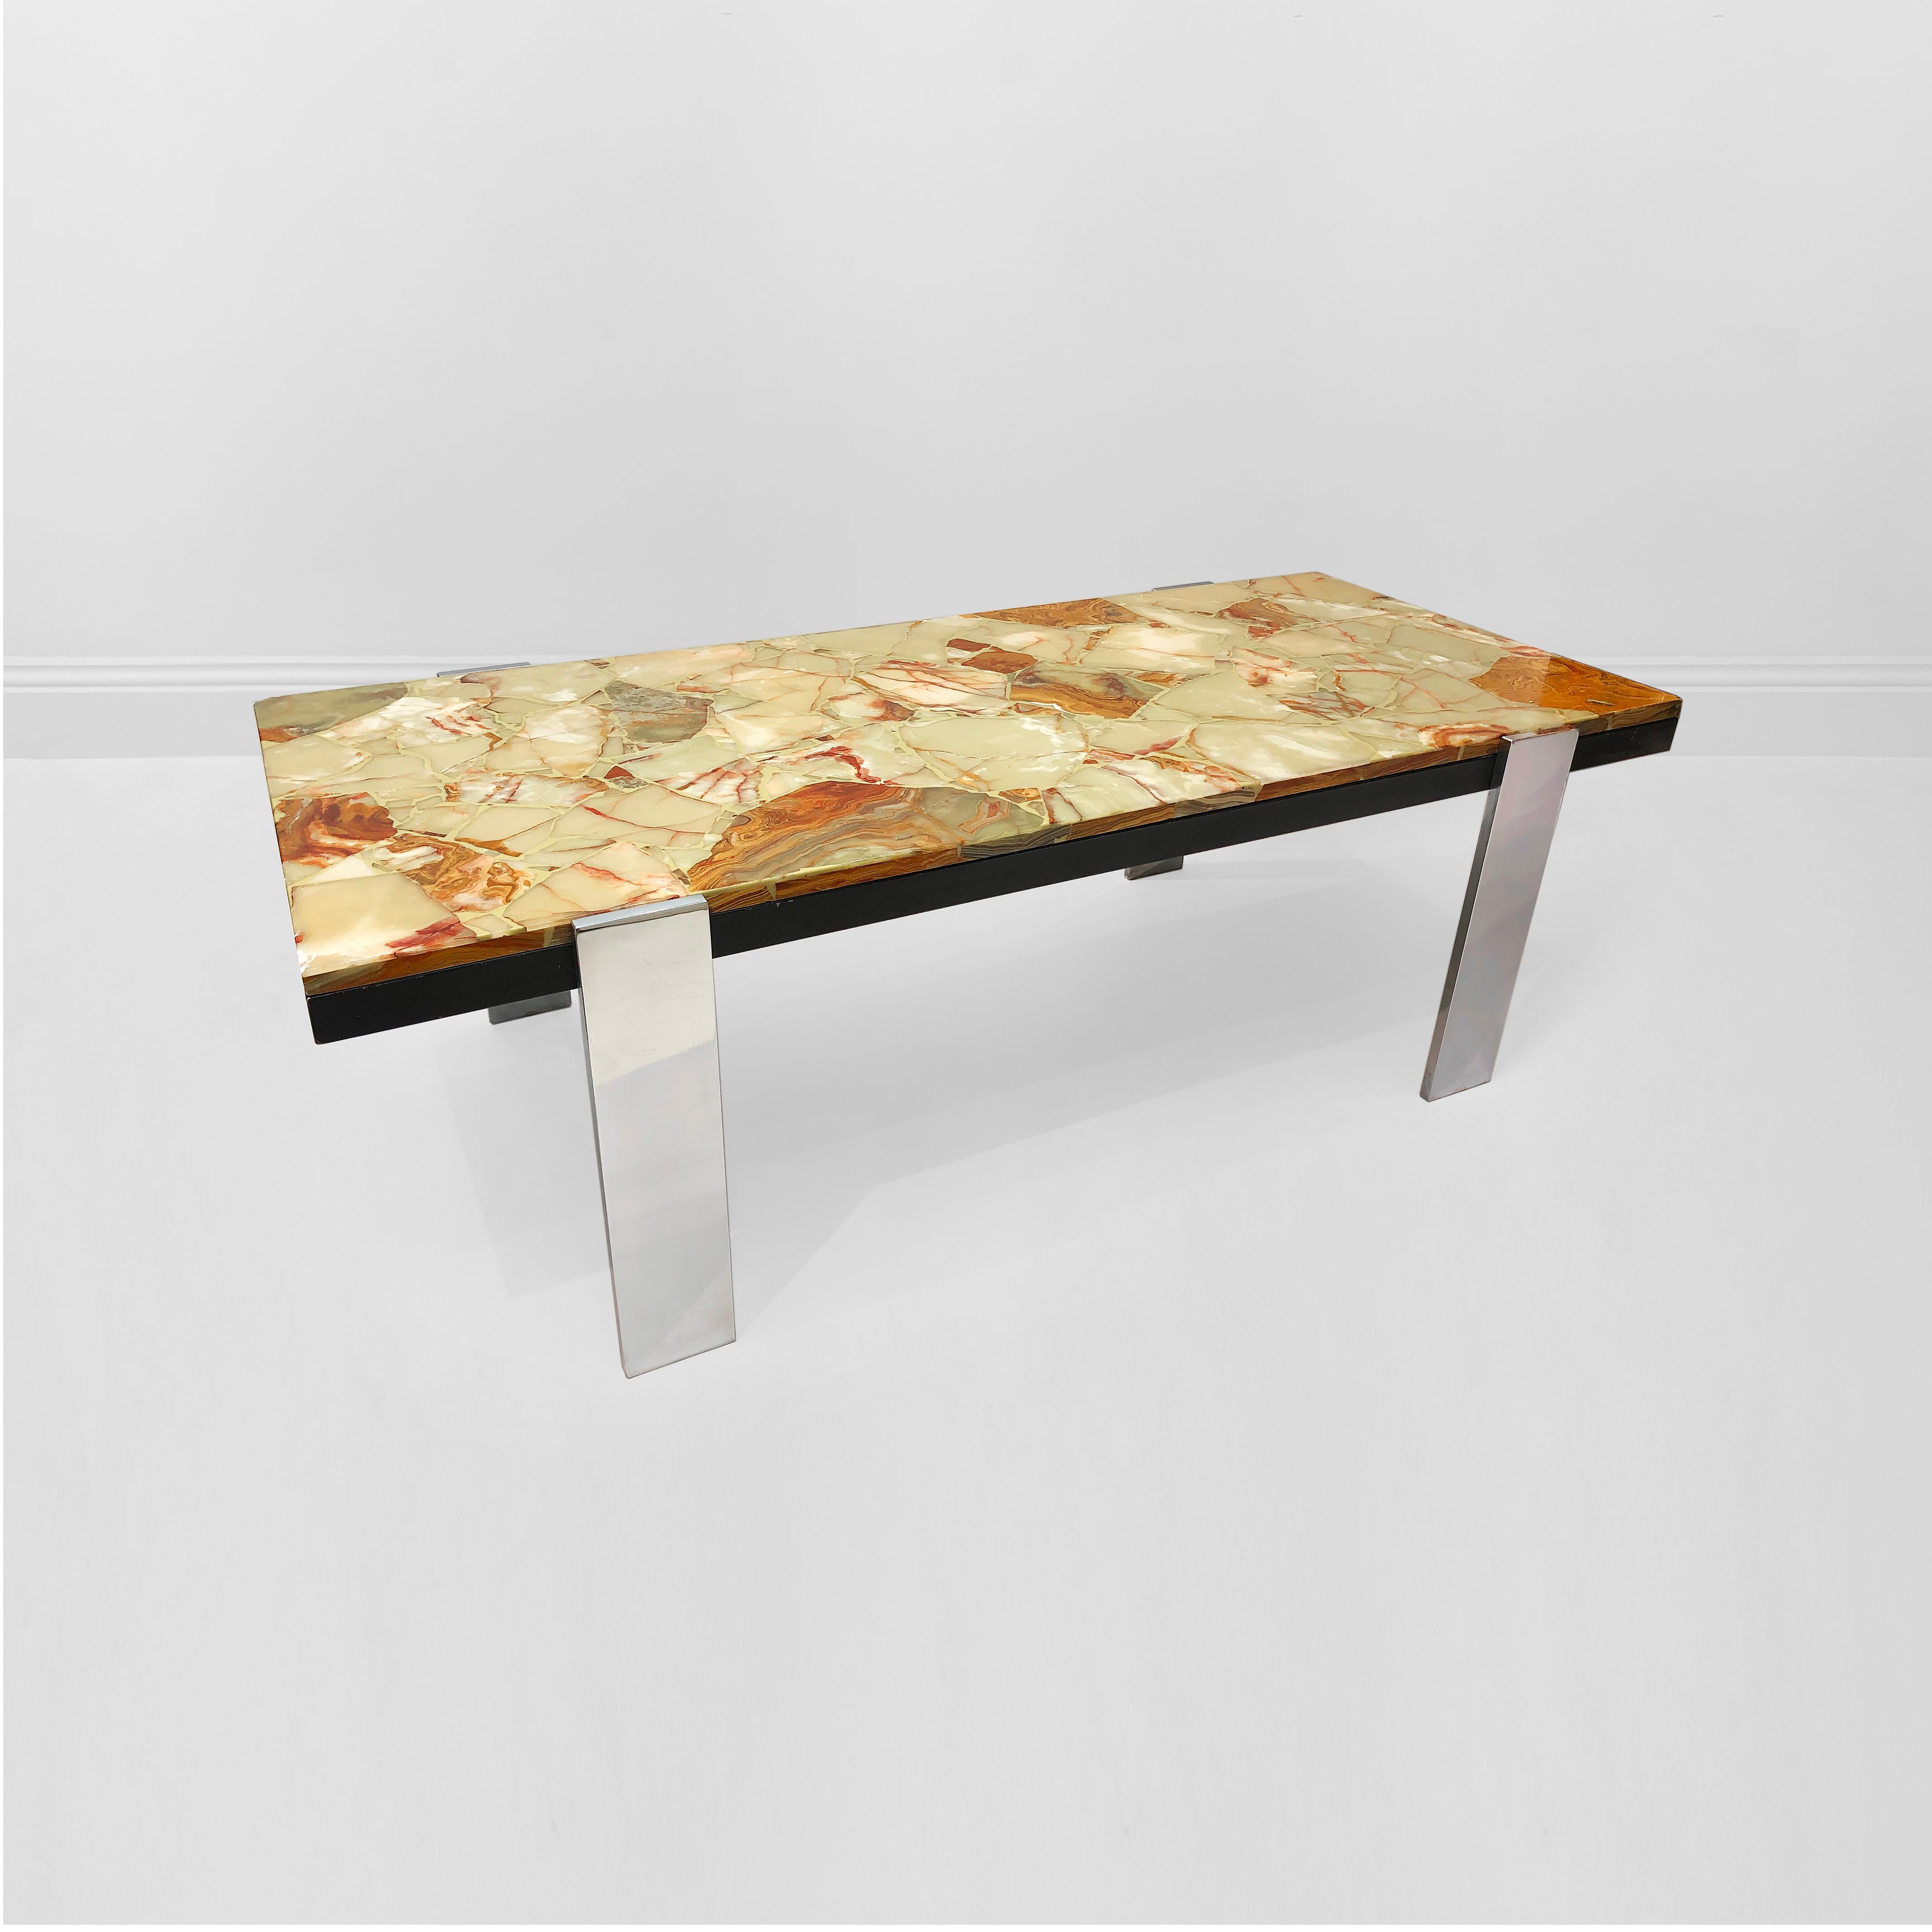 This gorgeous Mid-Century Modern coffee table originated in Italy in the 1970s, and was imported to the UK in the early 2010s. is a stunning piece of furniture that combines durability and elegance in equal measure. The table features sleek, steel